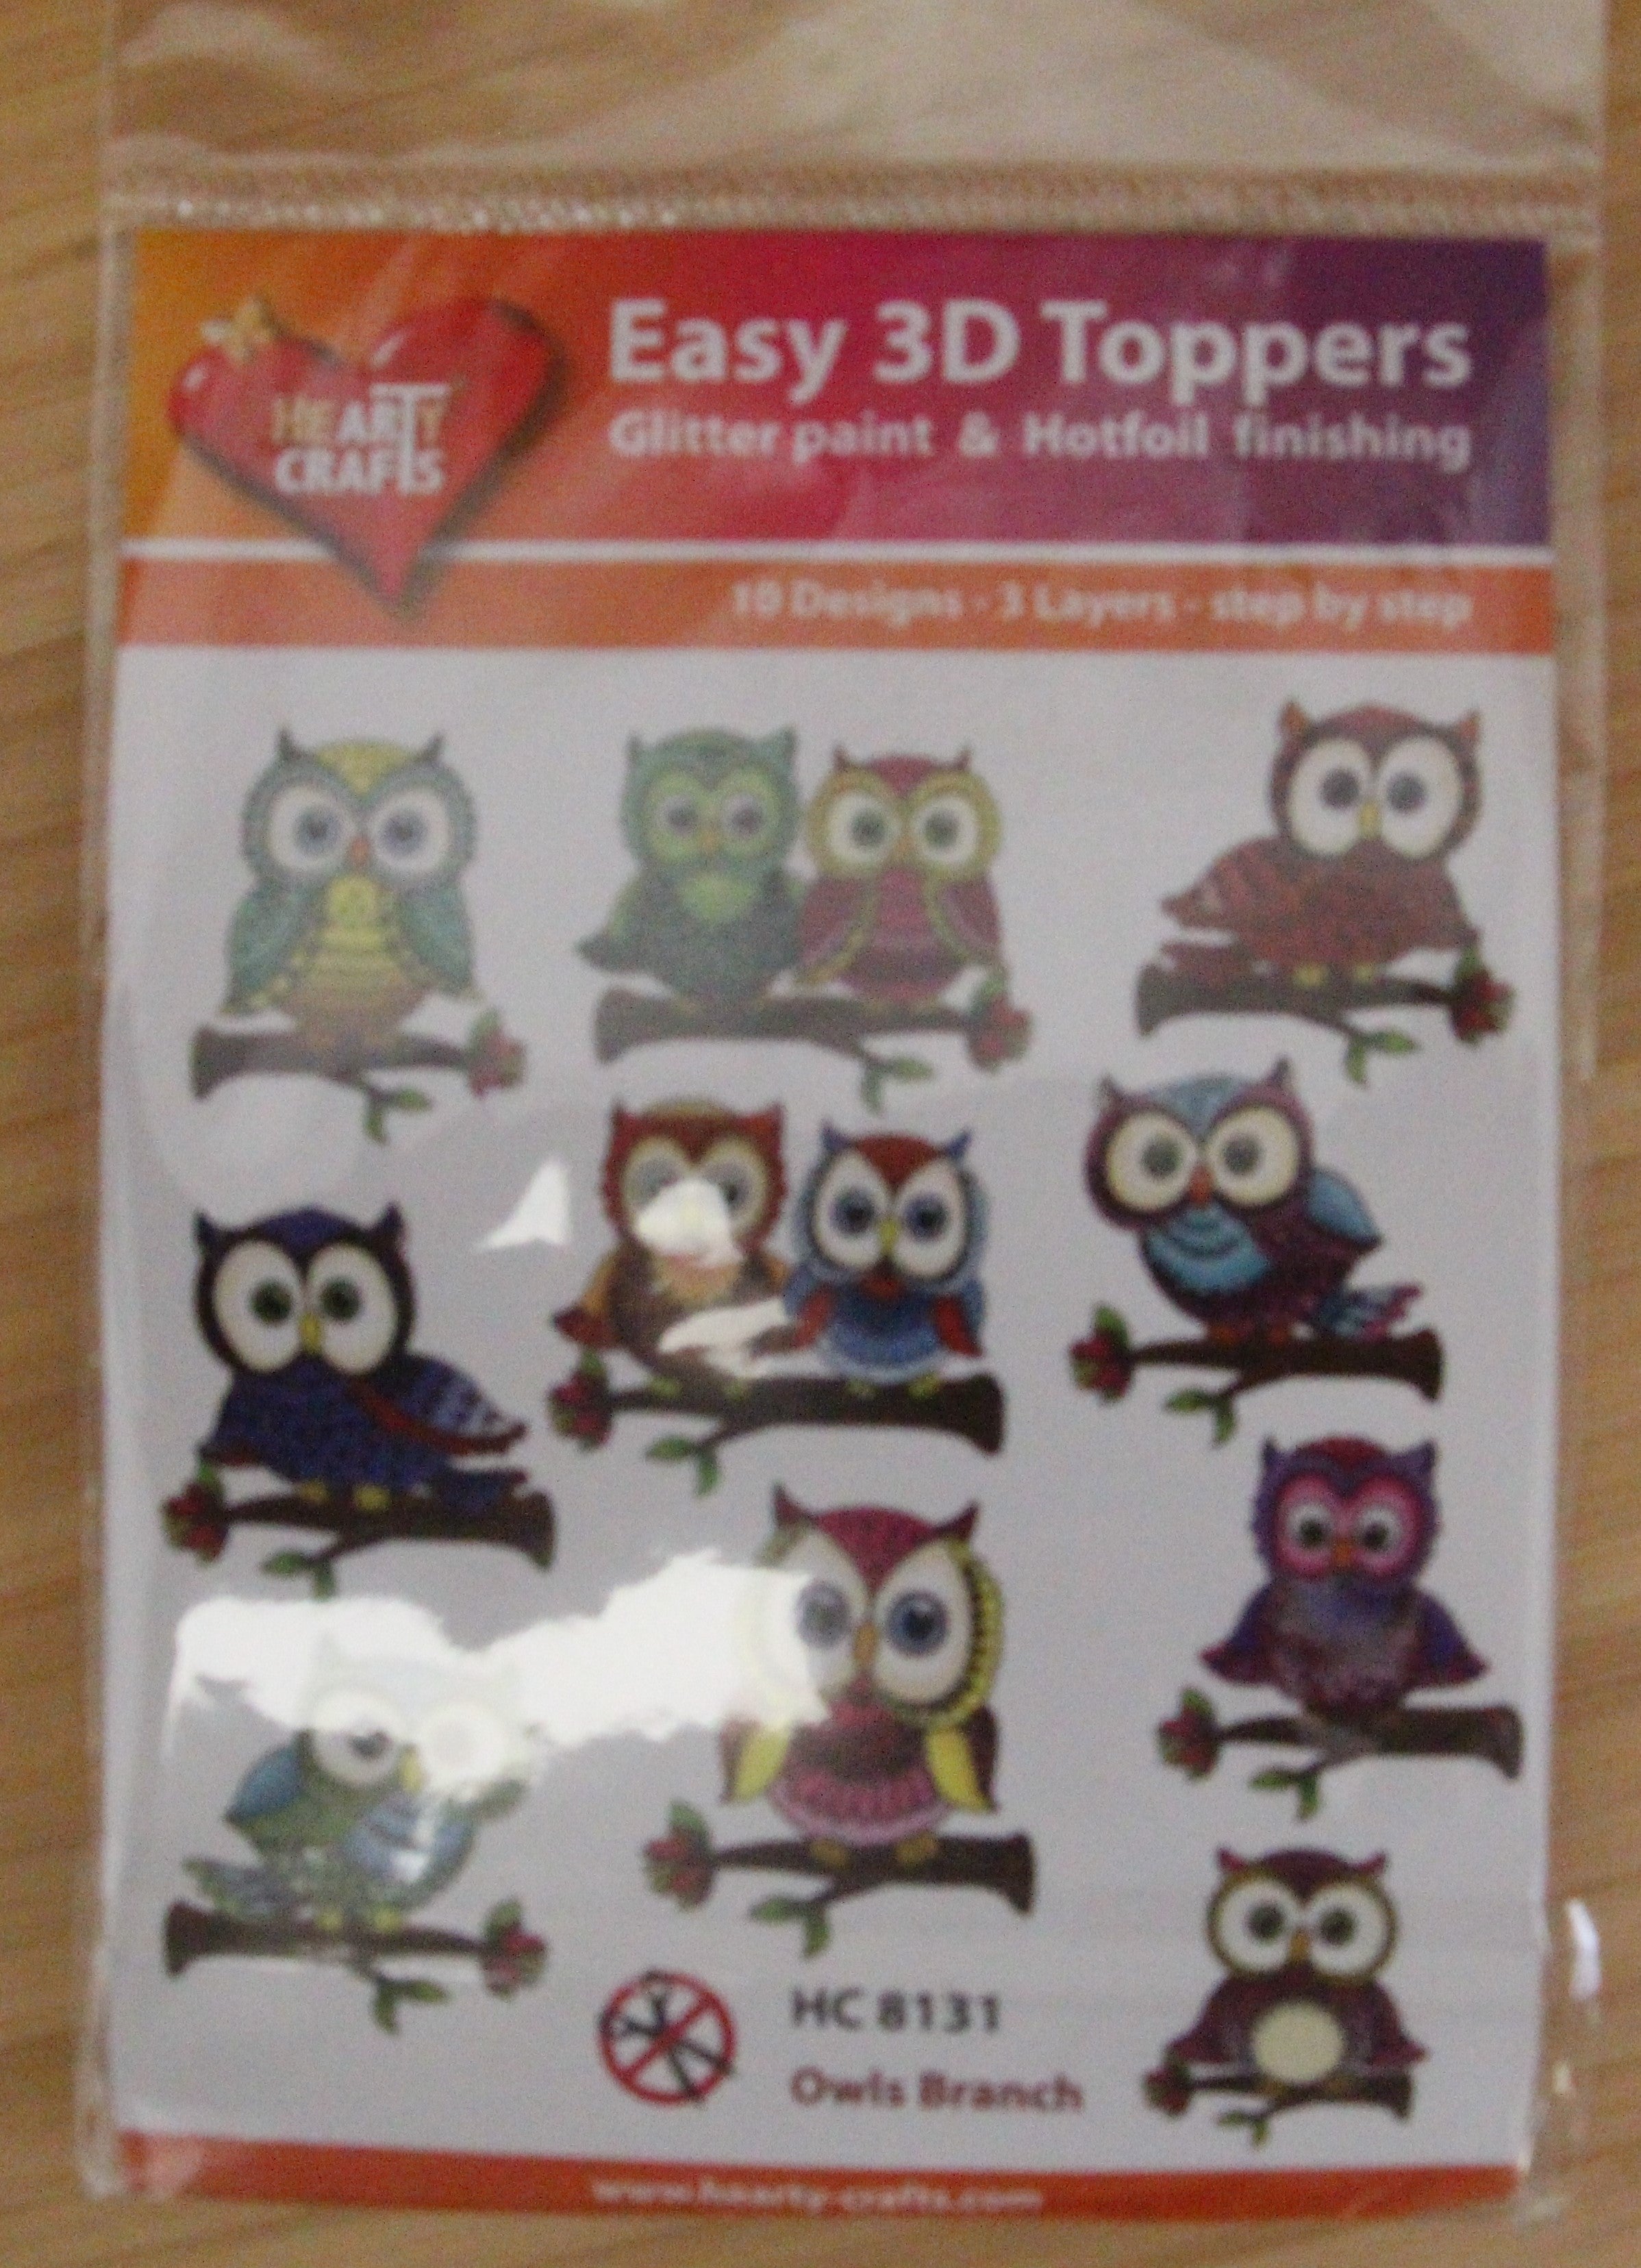 Easy 3-D Toppers Owls Branch